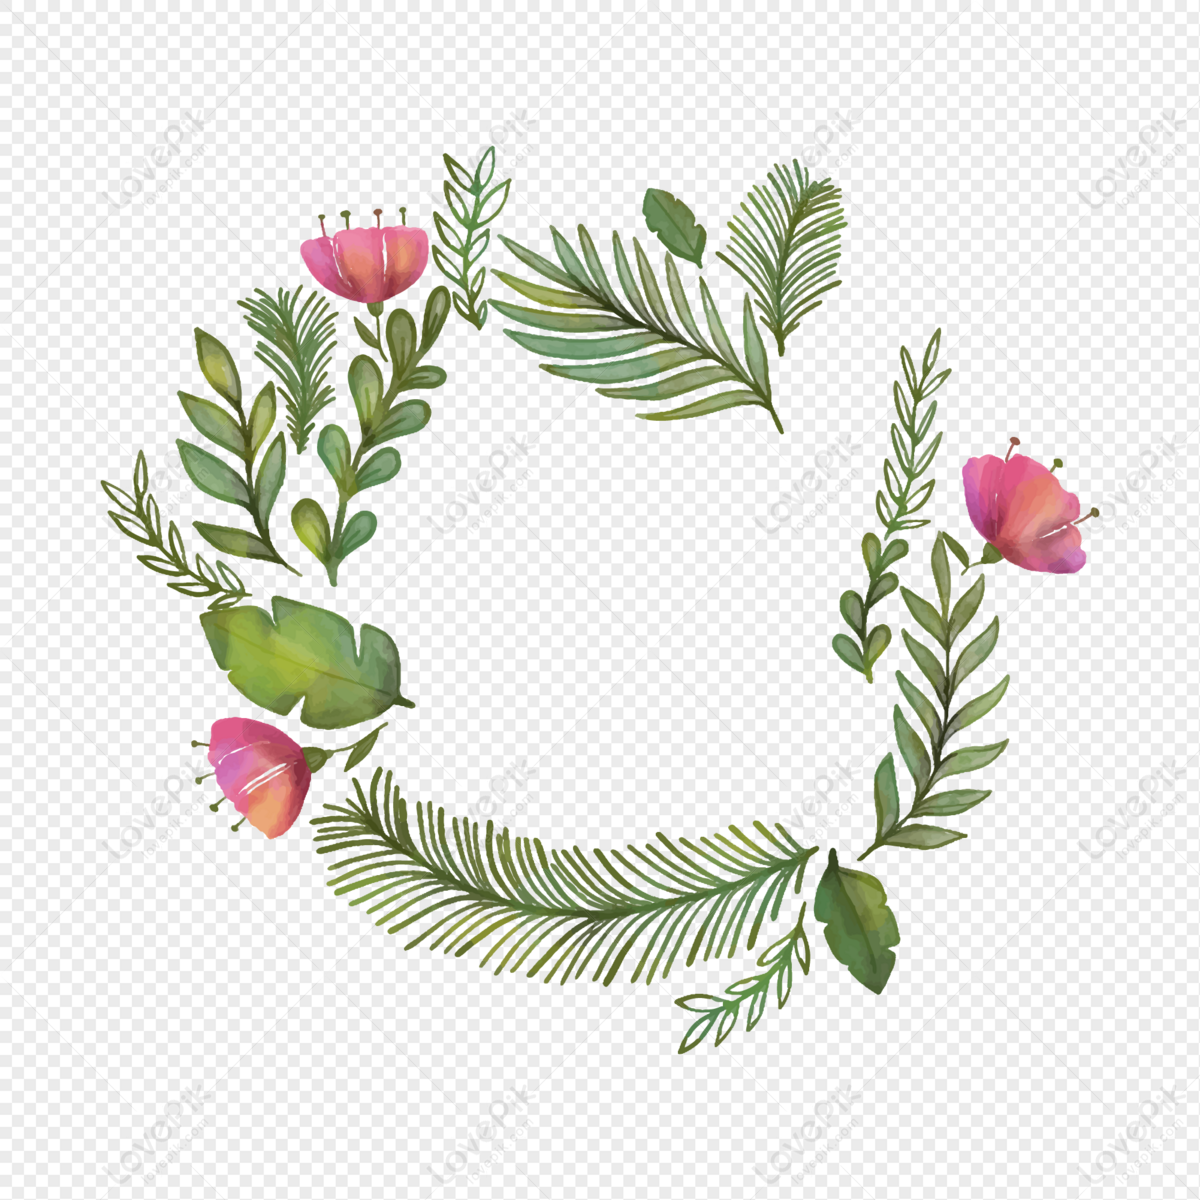 Flower Border PNG Image Free Download And Clipart Image For Free ...